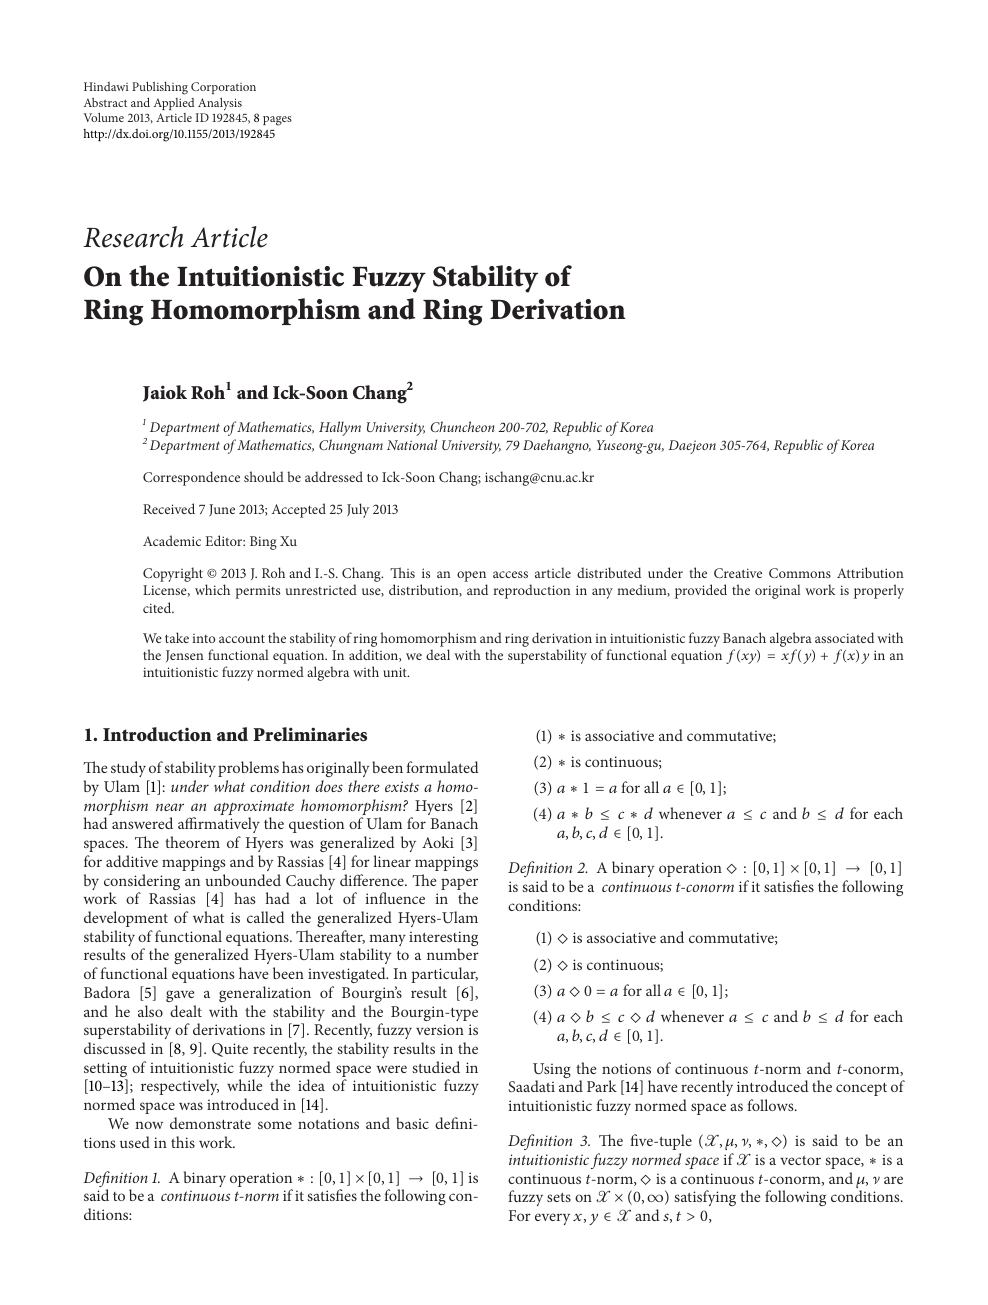 On The Intuitionistic Fuzzy Stability Of Ring Homomorphism And Ring Derivation Topic Of Research Paper In Mathematics Download Scholarly Article Pdf And Read For Free On Cyberleninka Open Science Hub